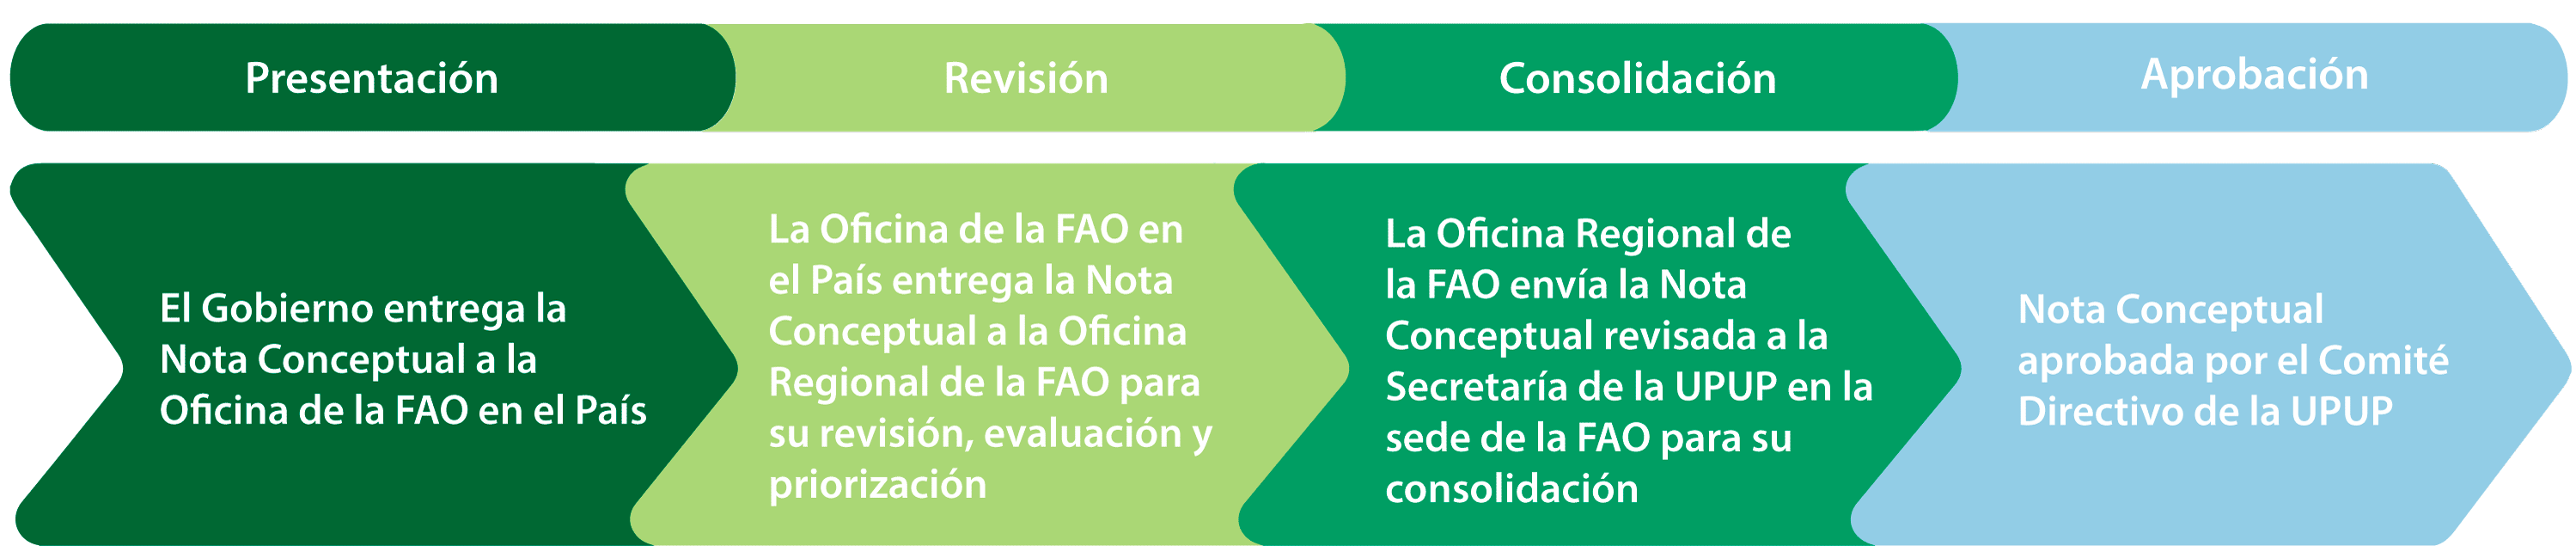 Submission and approval of application procedure of the OCOP